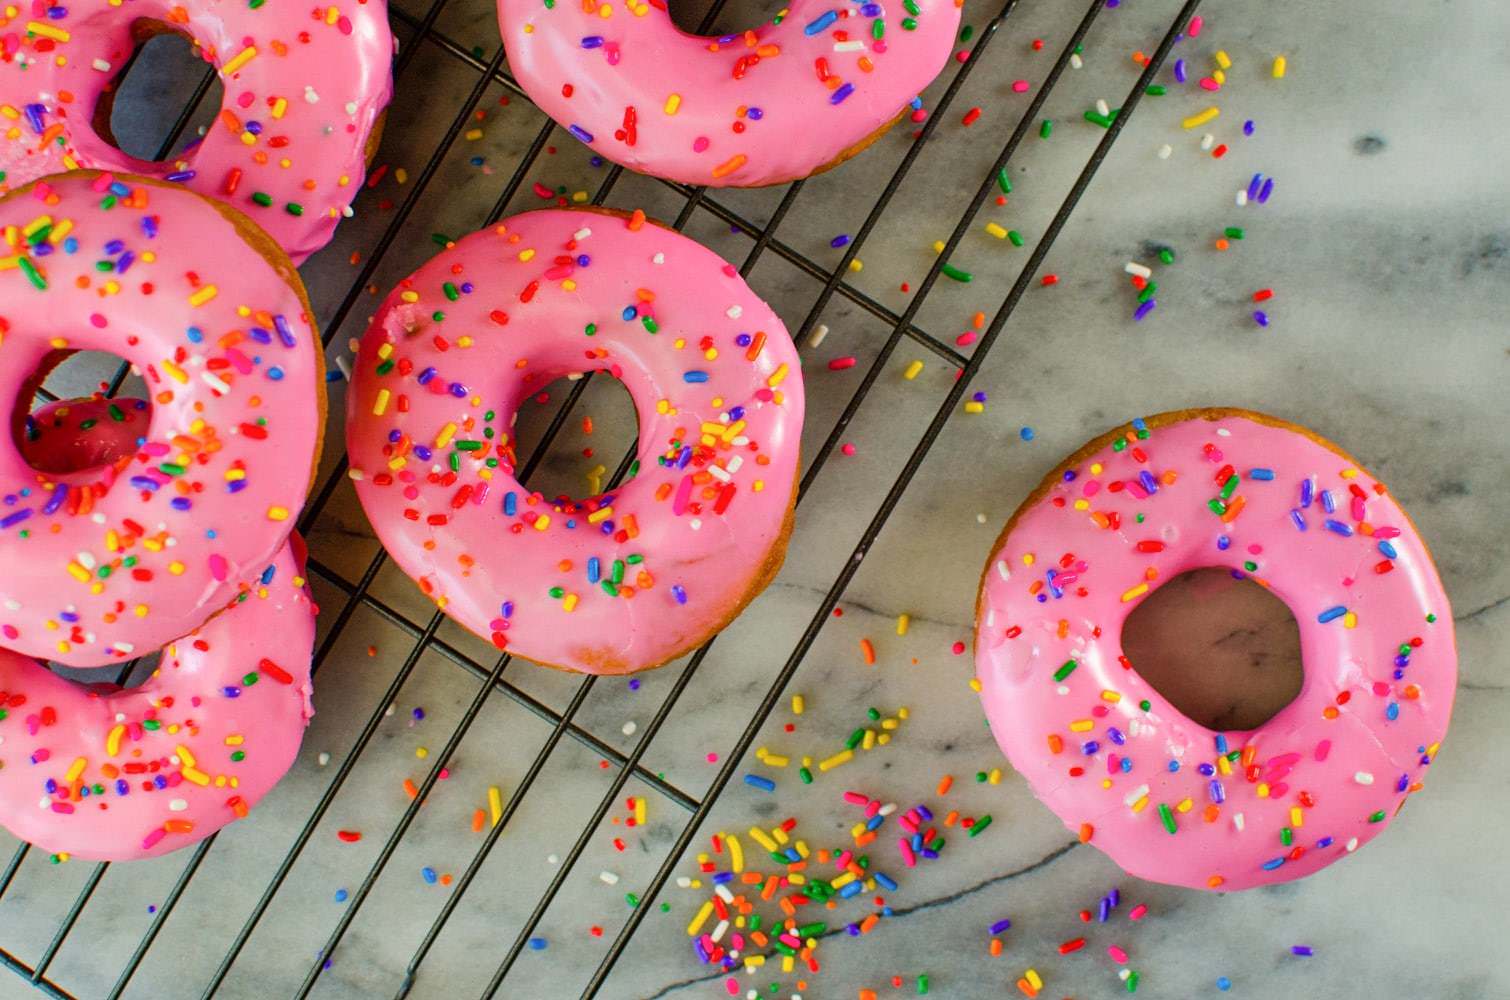 🥐 Can We Guess Your Age and Gender Based on the Pastries You’ve Eaten? Strawberry sprinkled donuts